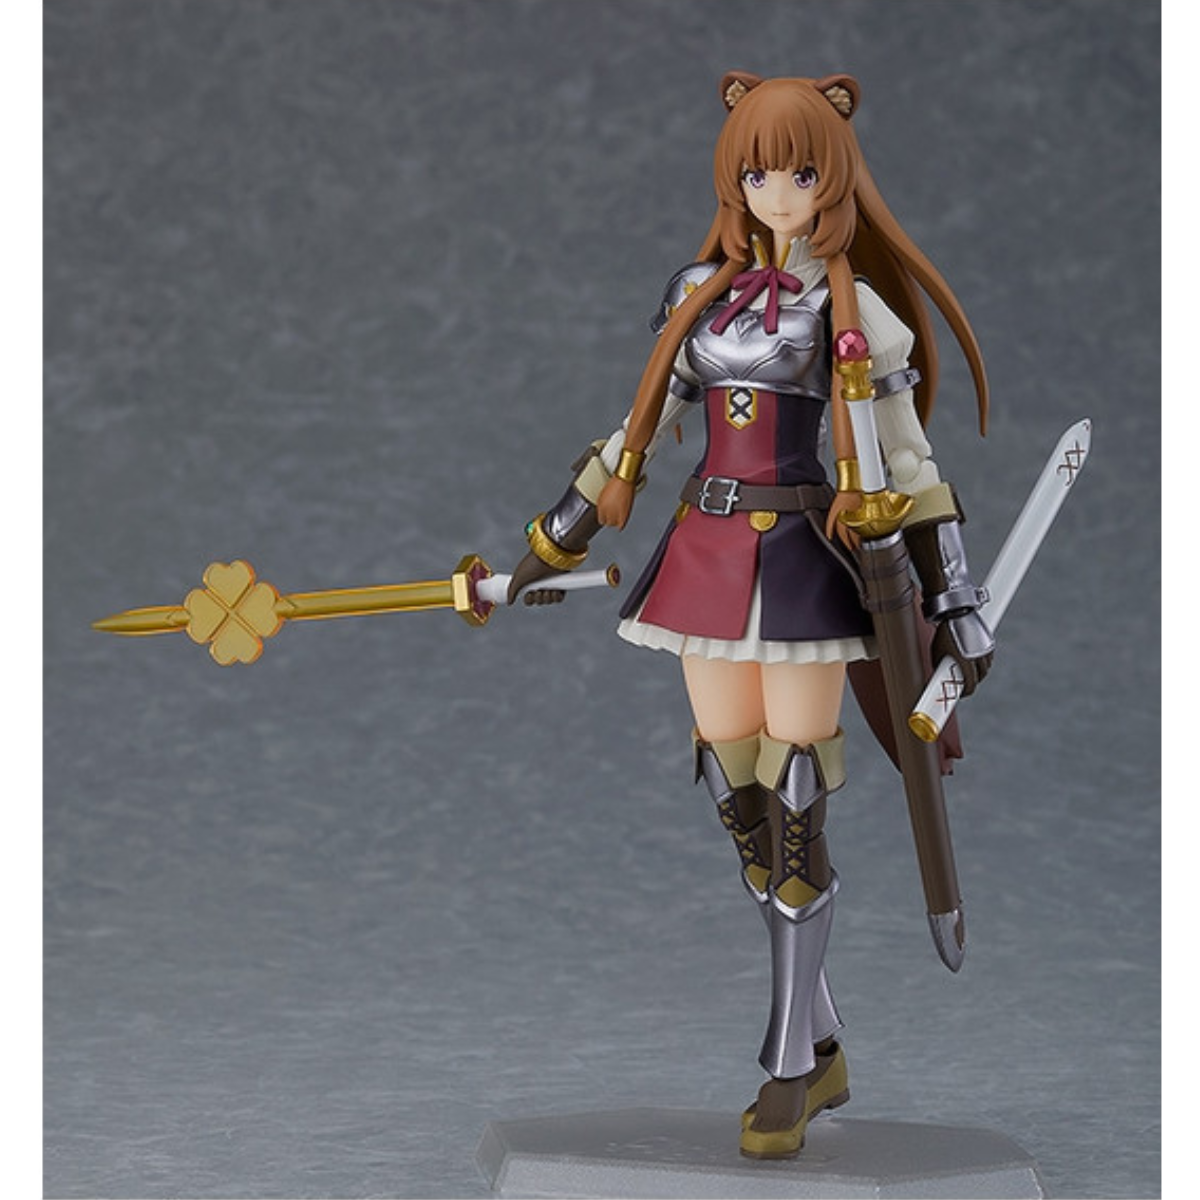 The Rising Of The Shield Hero Figma [467] "Raphtalia" (Re-run)-Max Factory-Ace Cards & Collectibles